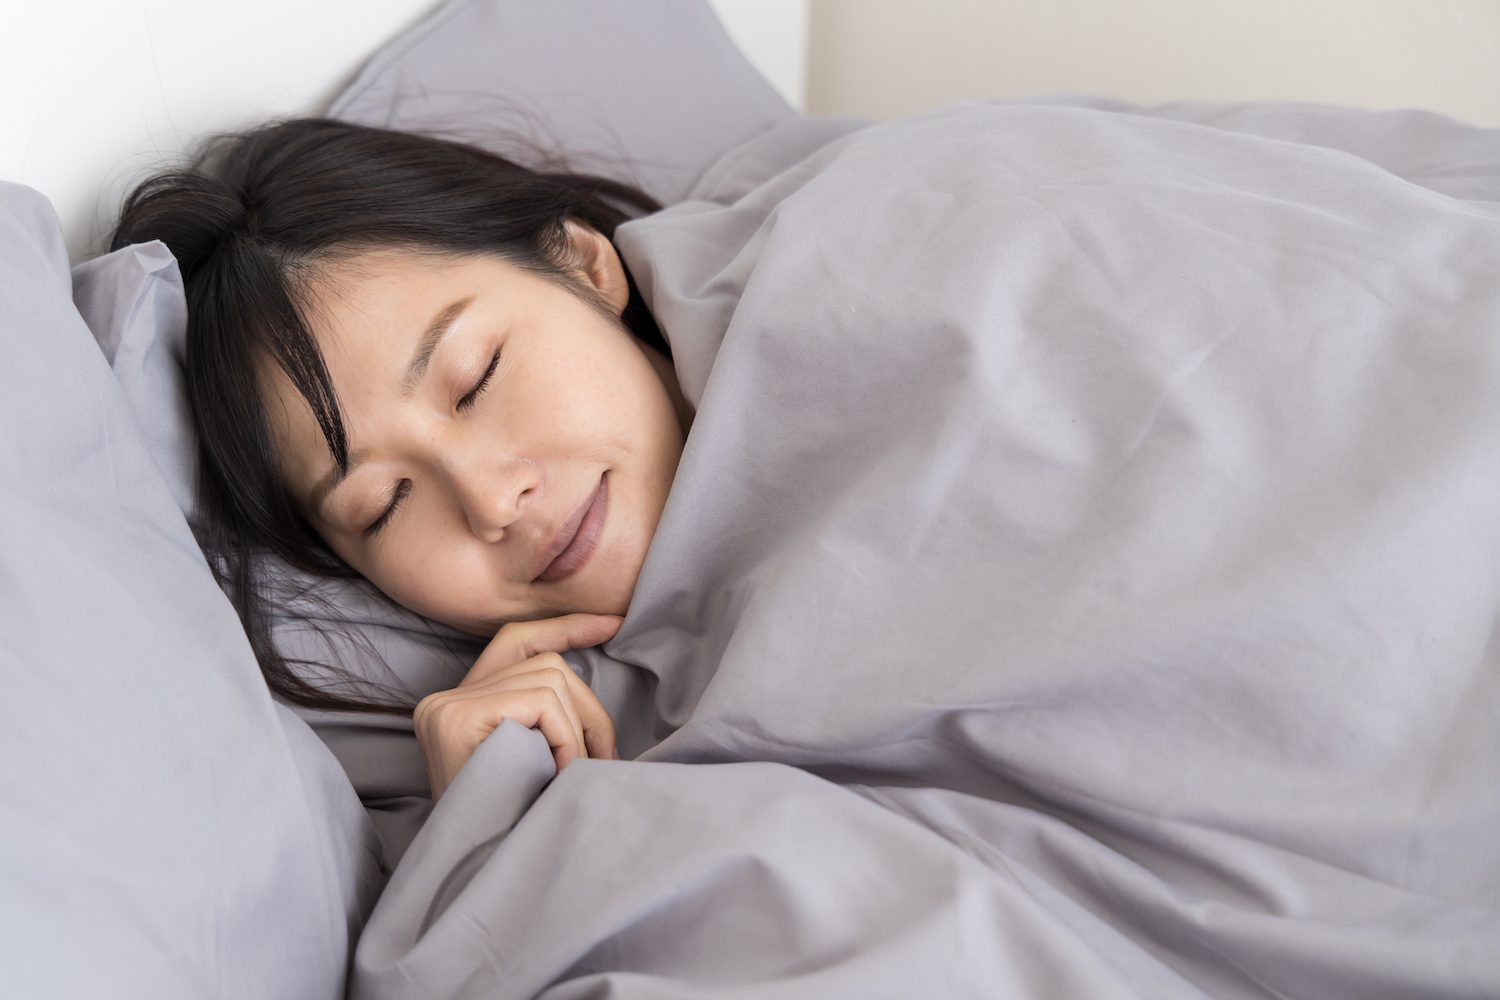 Try this method of deep muscle relaxation to improve your sleep quality